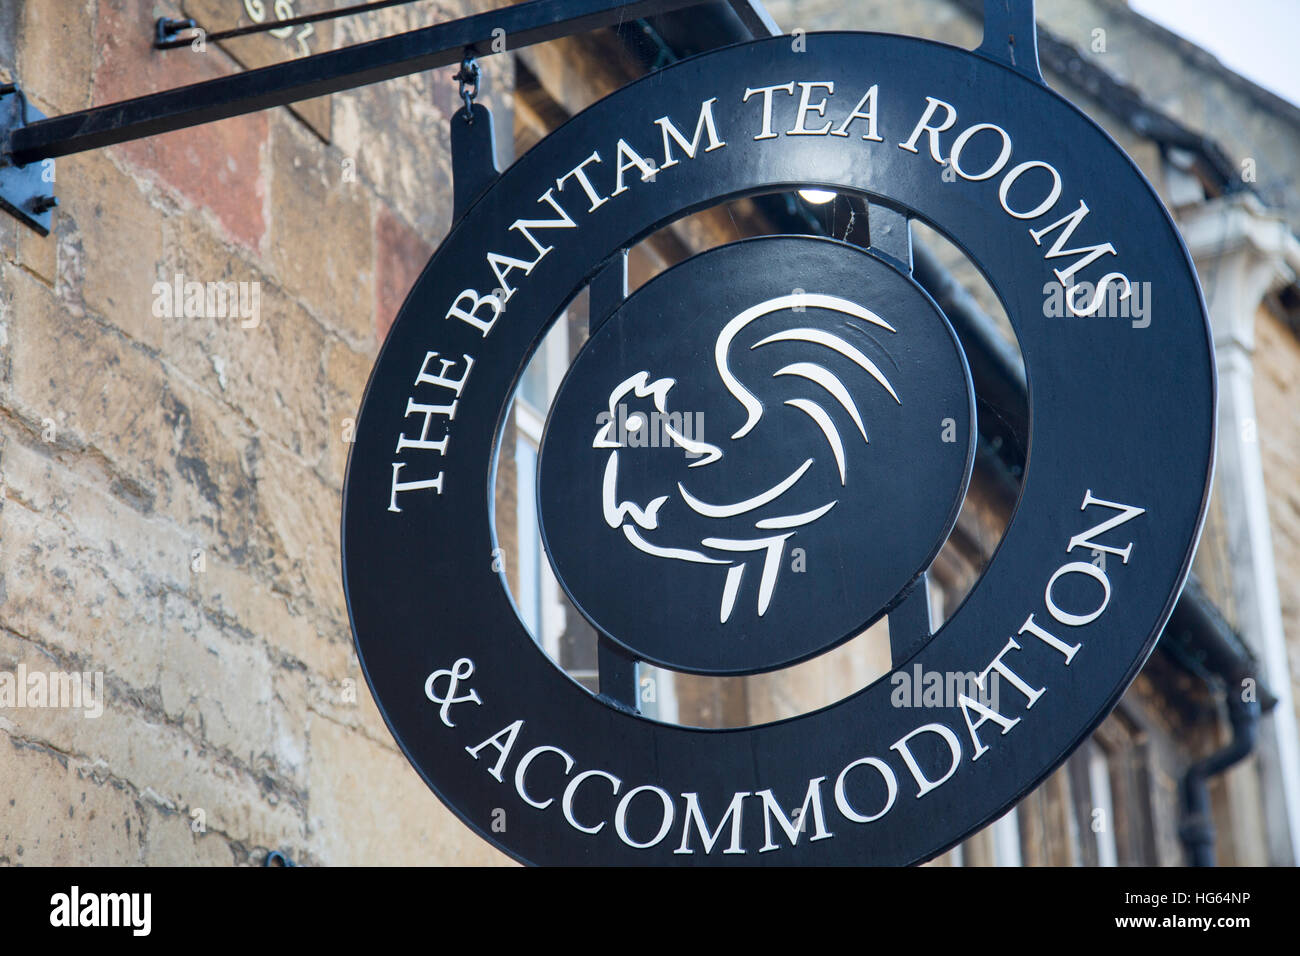 Bantam tea rooms and hotel in the historic village market town of Chipping Campden in the Cotswolds, England,UK Stock Photo